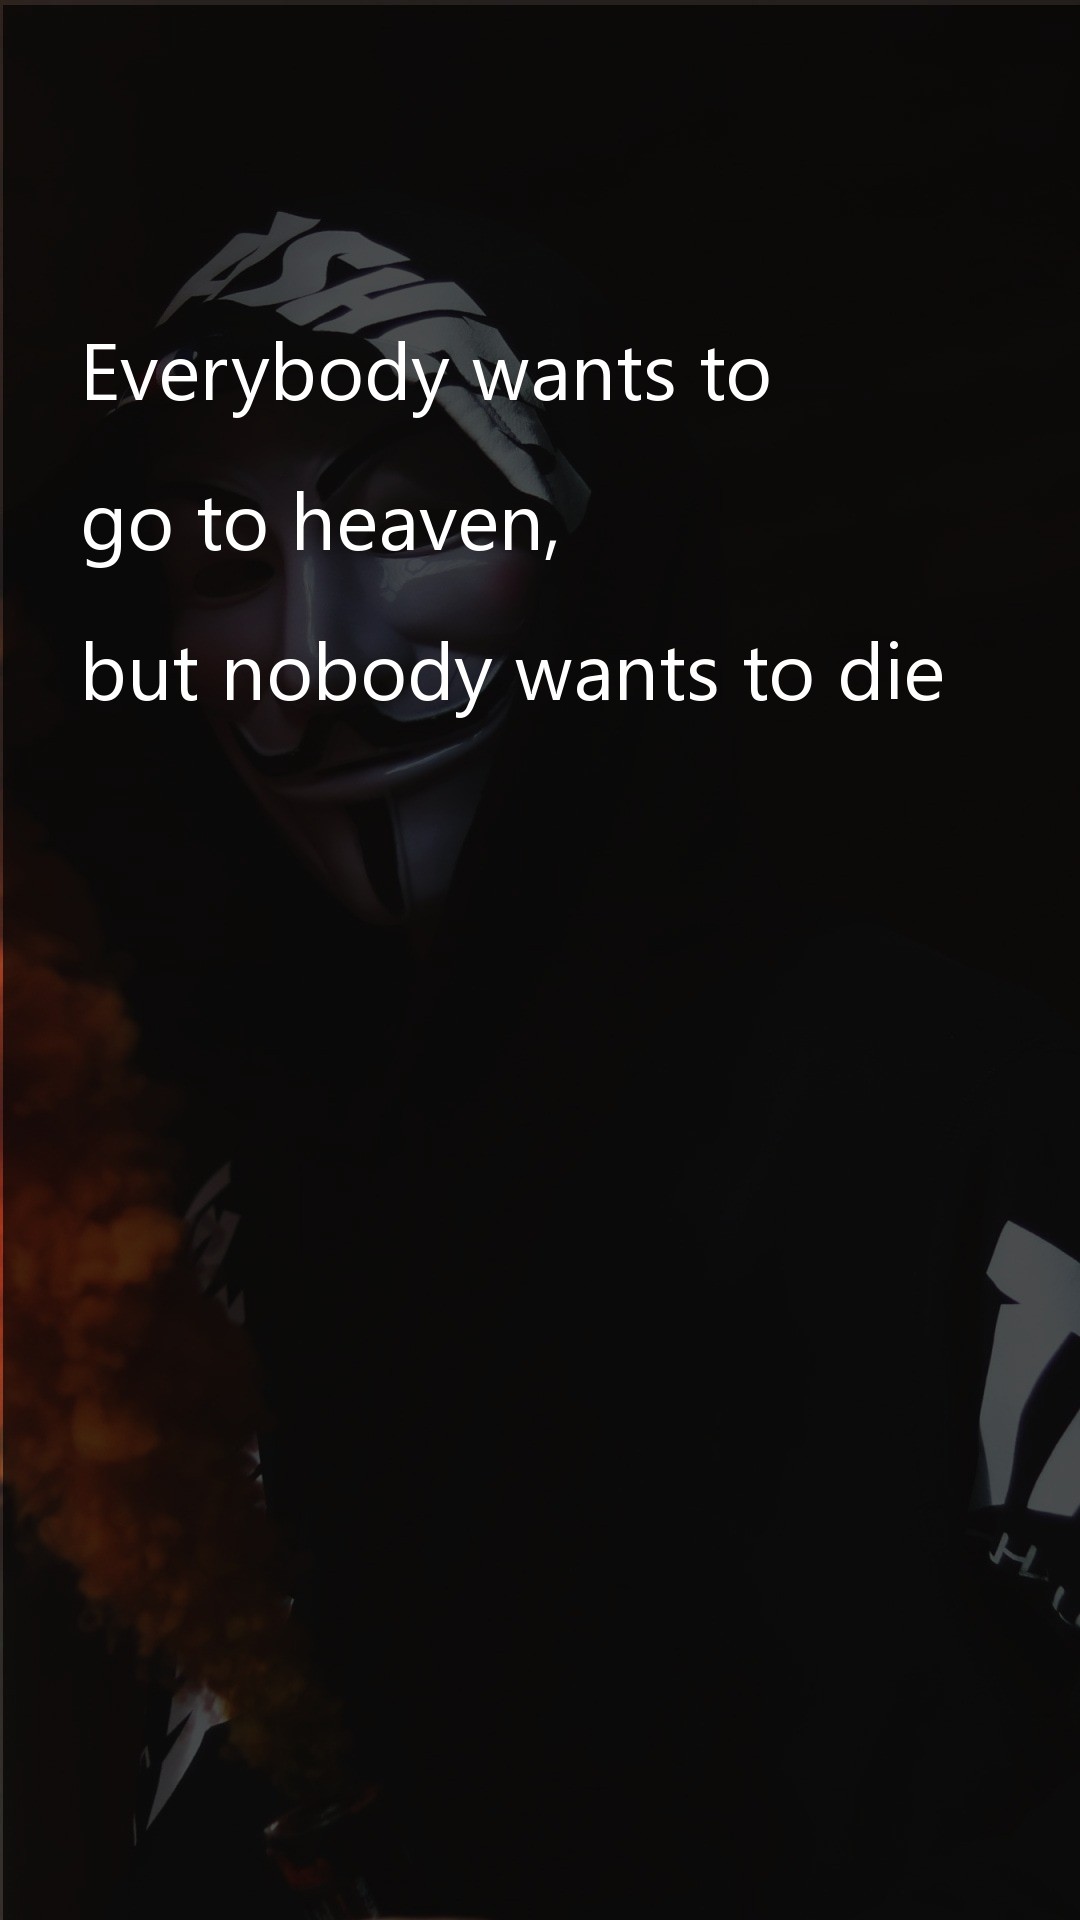 Everybody wants to - Death Quotes at statush.com